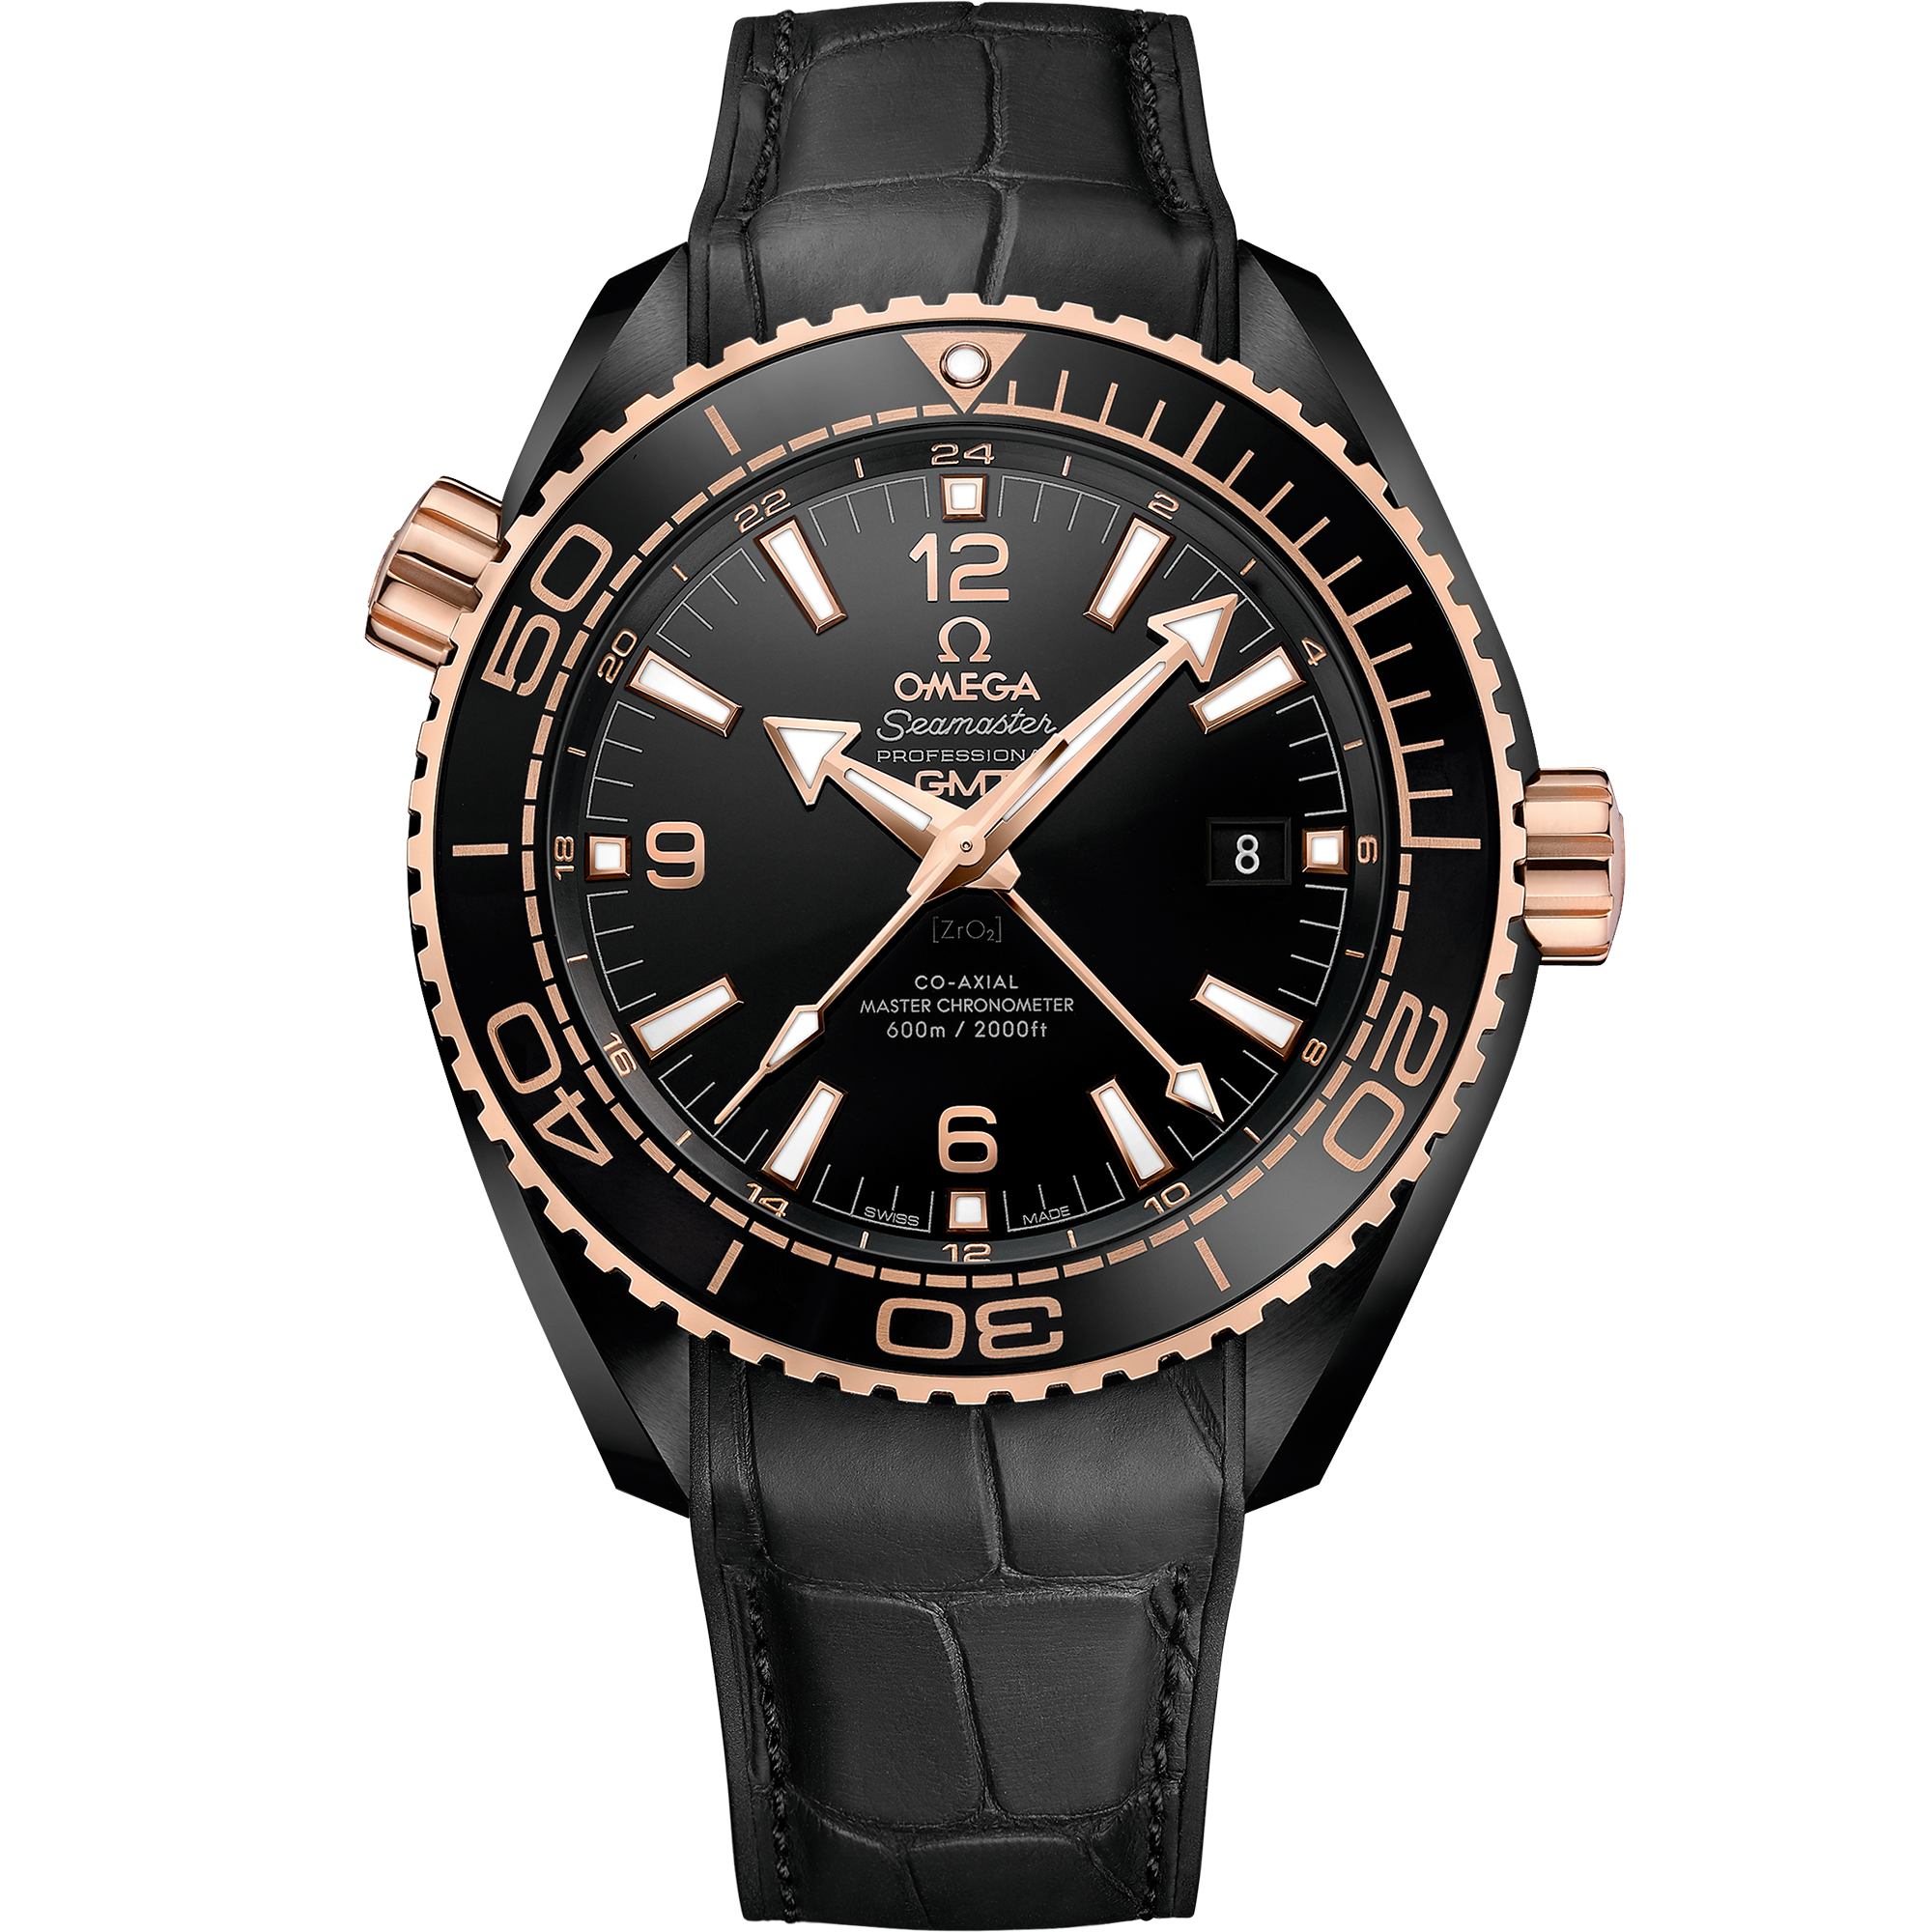 Seamaster 45.5 mm, black ceramic on leather strap with rubber lining - 21563462201001